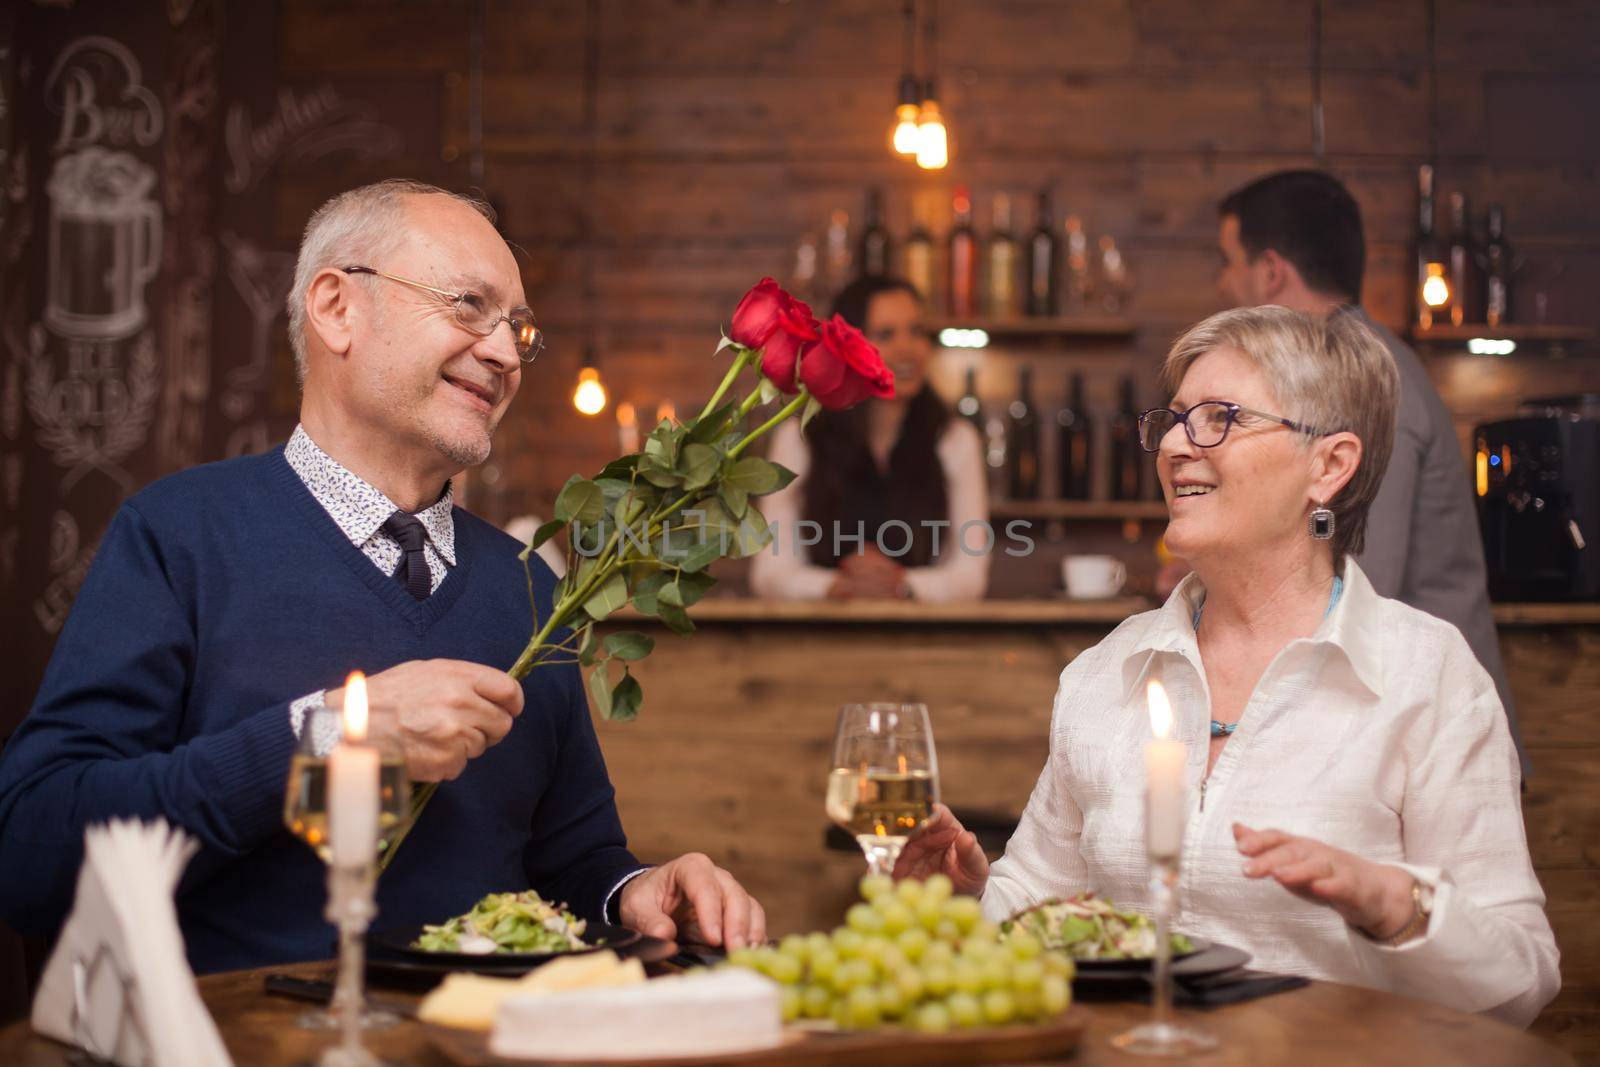 Husband in his sixties giving roses to his wife in a restaurant. Happy wife. Old people smiling. Mature man and woman.